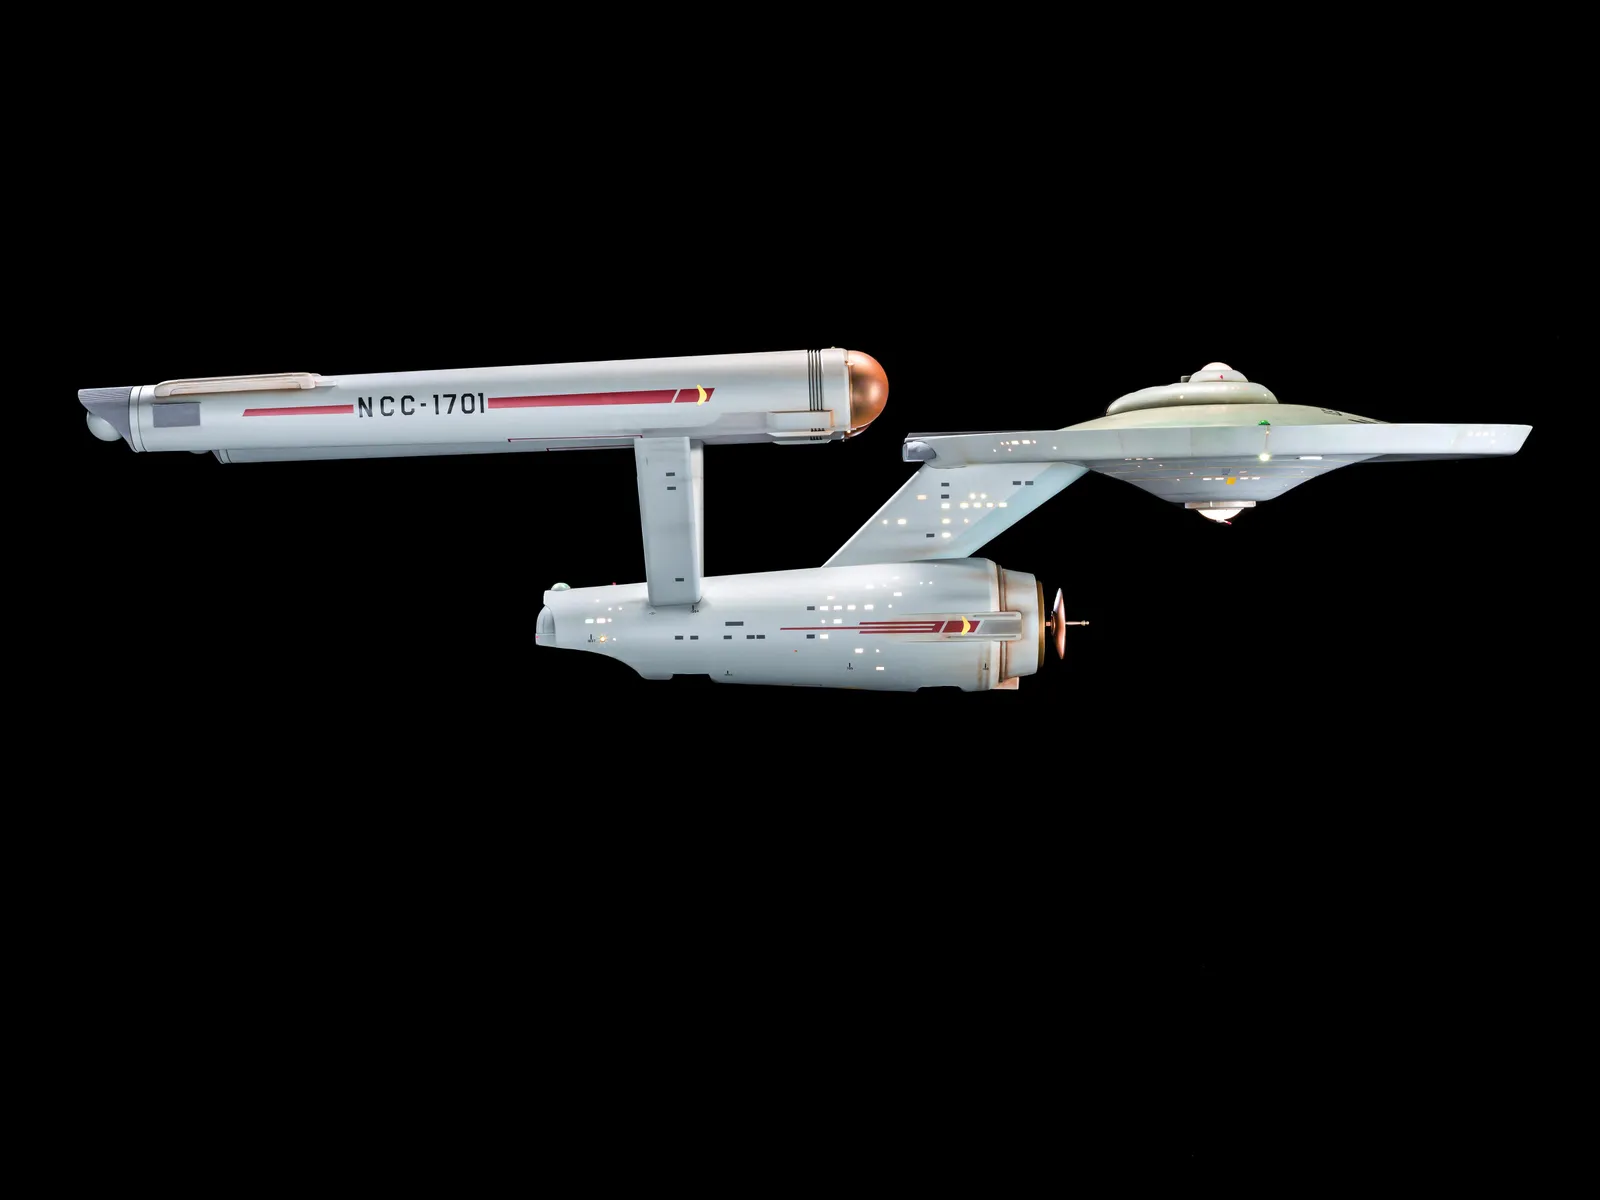 Star Trek's U.S.S. Enterprise to Boldly Go Back to the Workshop, Air &  Space Magazine